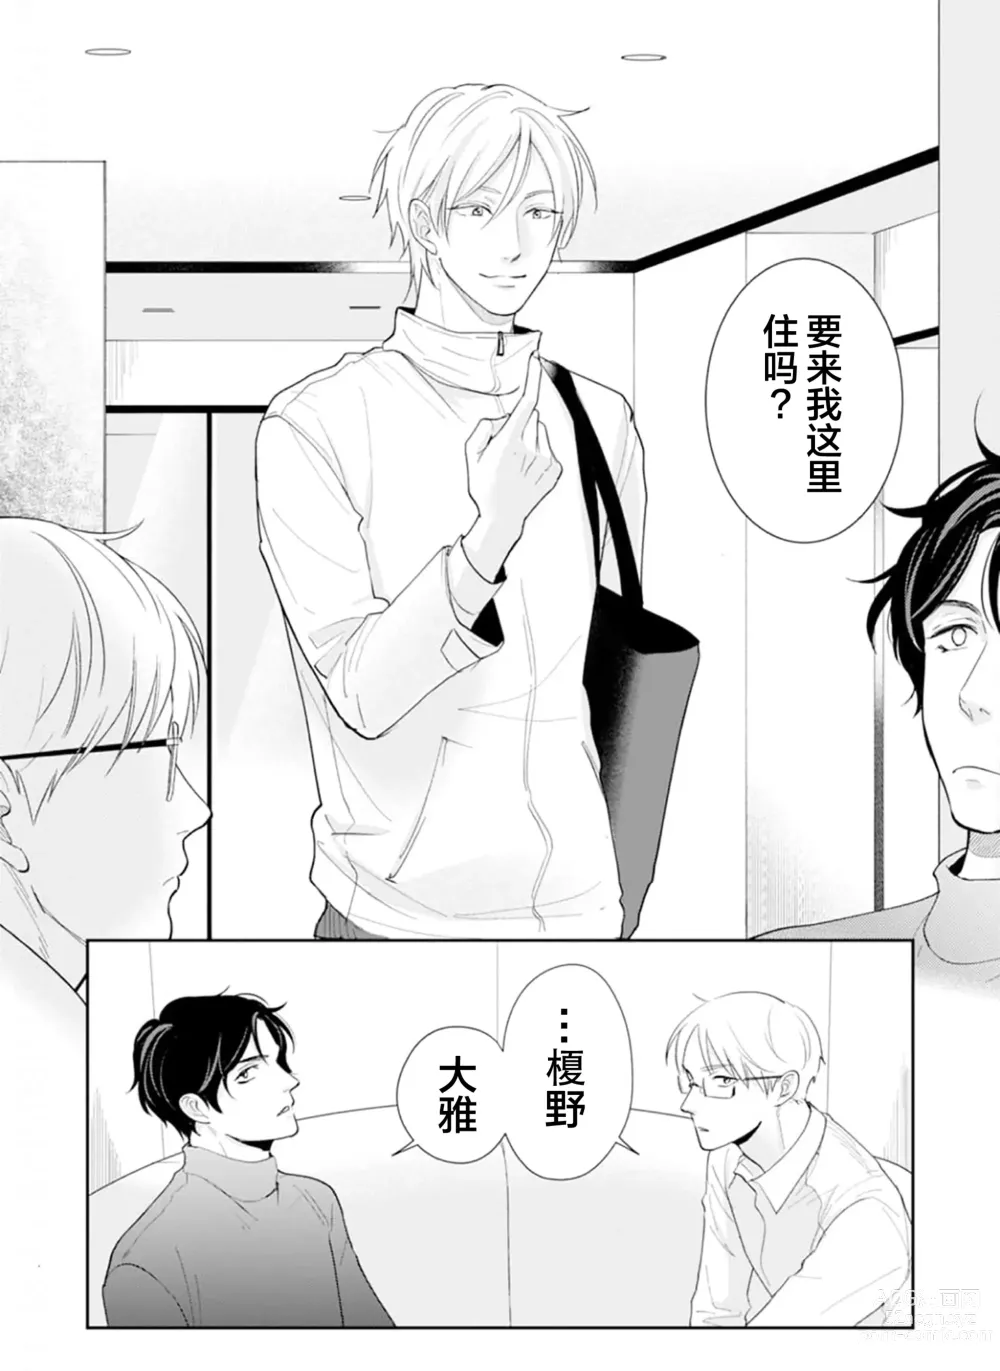 Page 16 of manga Toshiue no hitoーsecond bloomー｜年上之人—second bloom—Chinese]